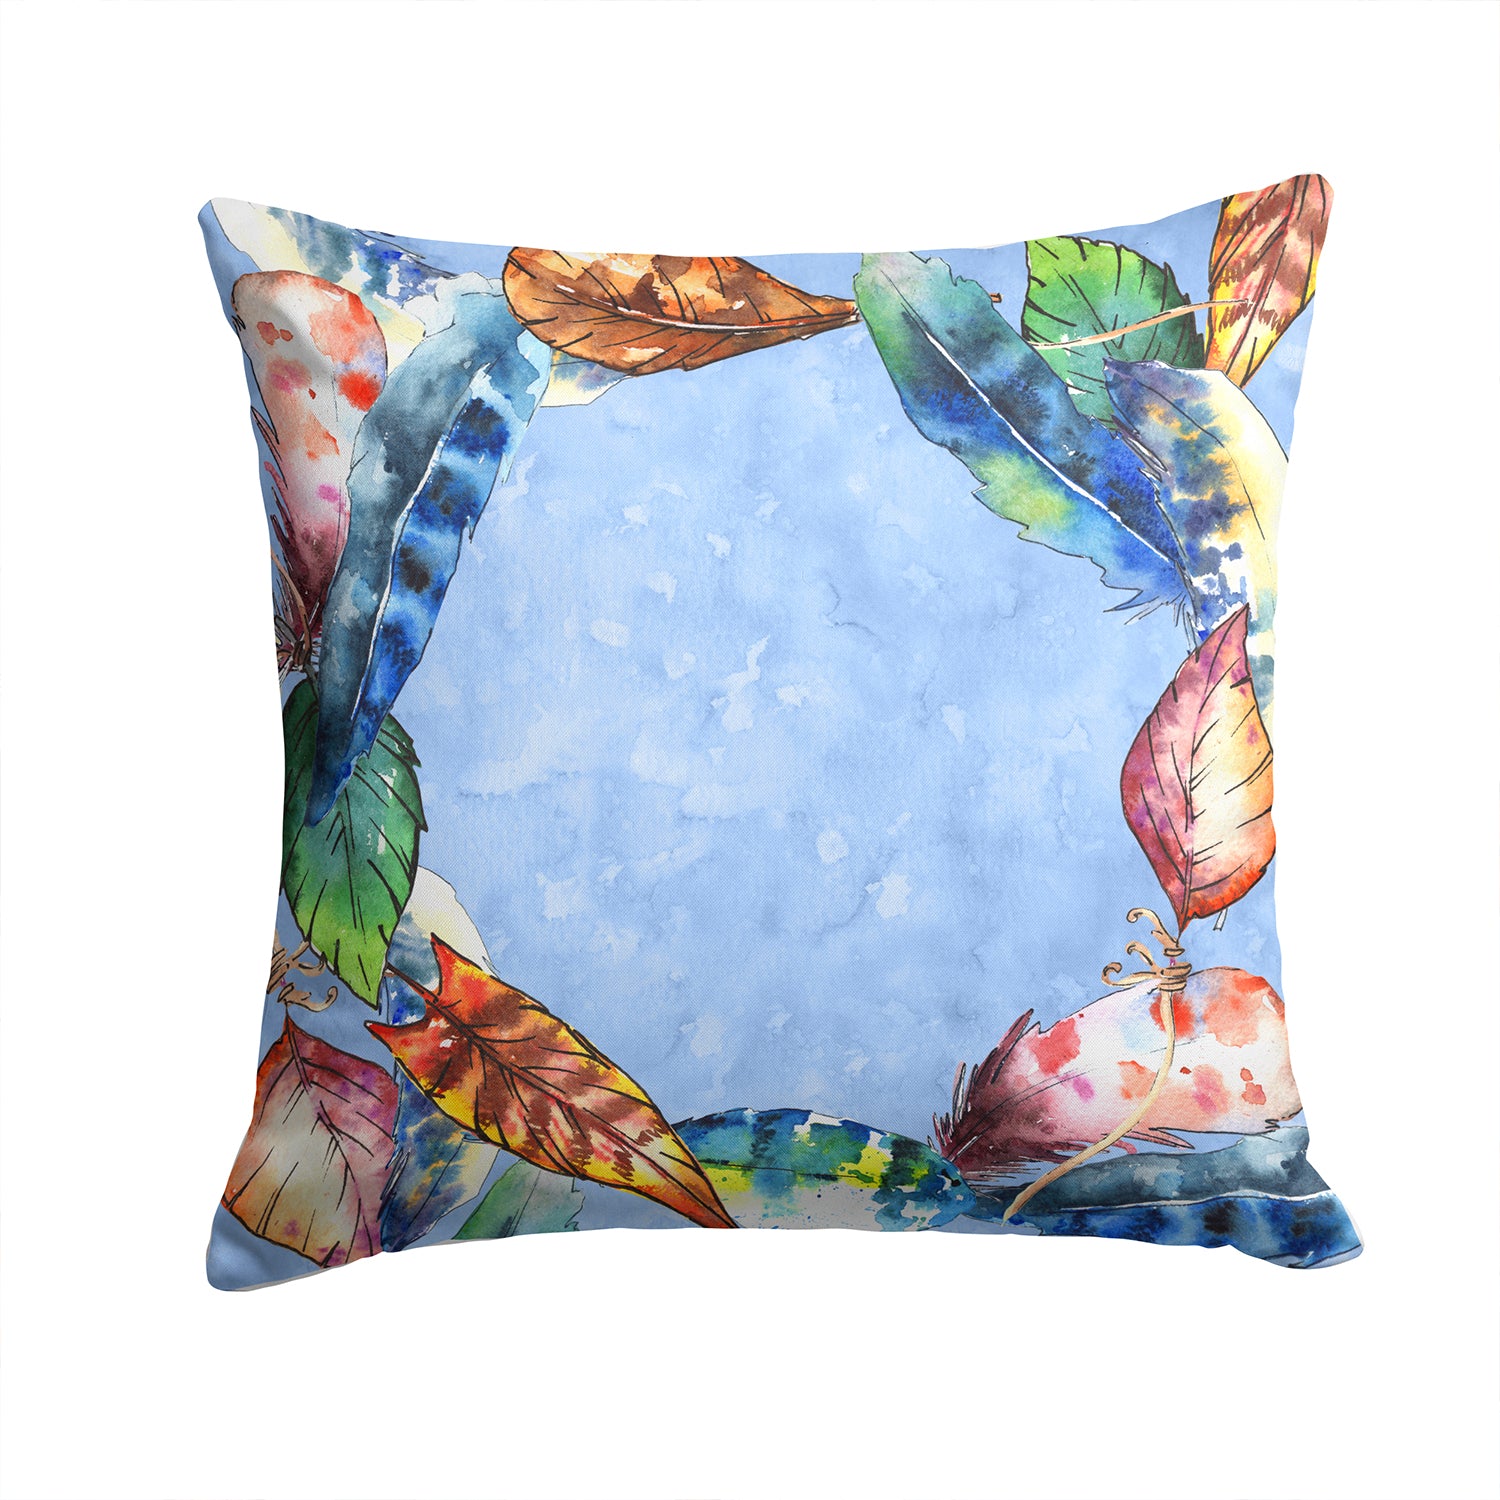 Feathers Fabric Decorative Pillow CK1704PW1414 - the-store.com